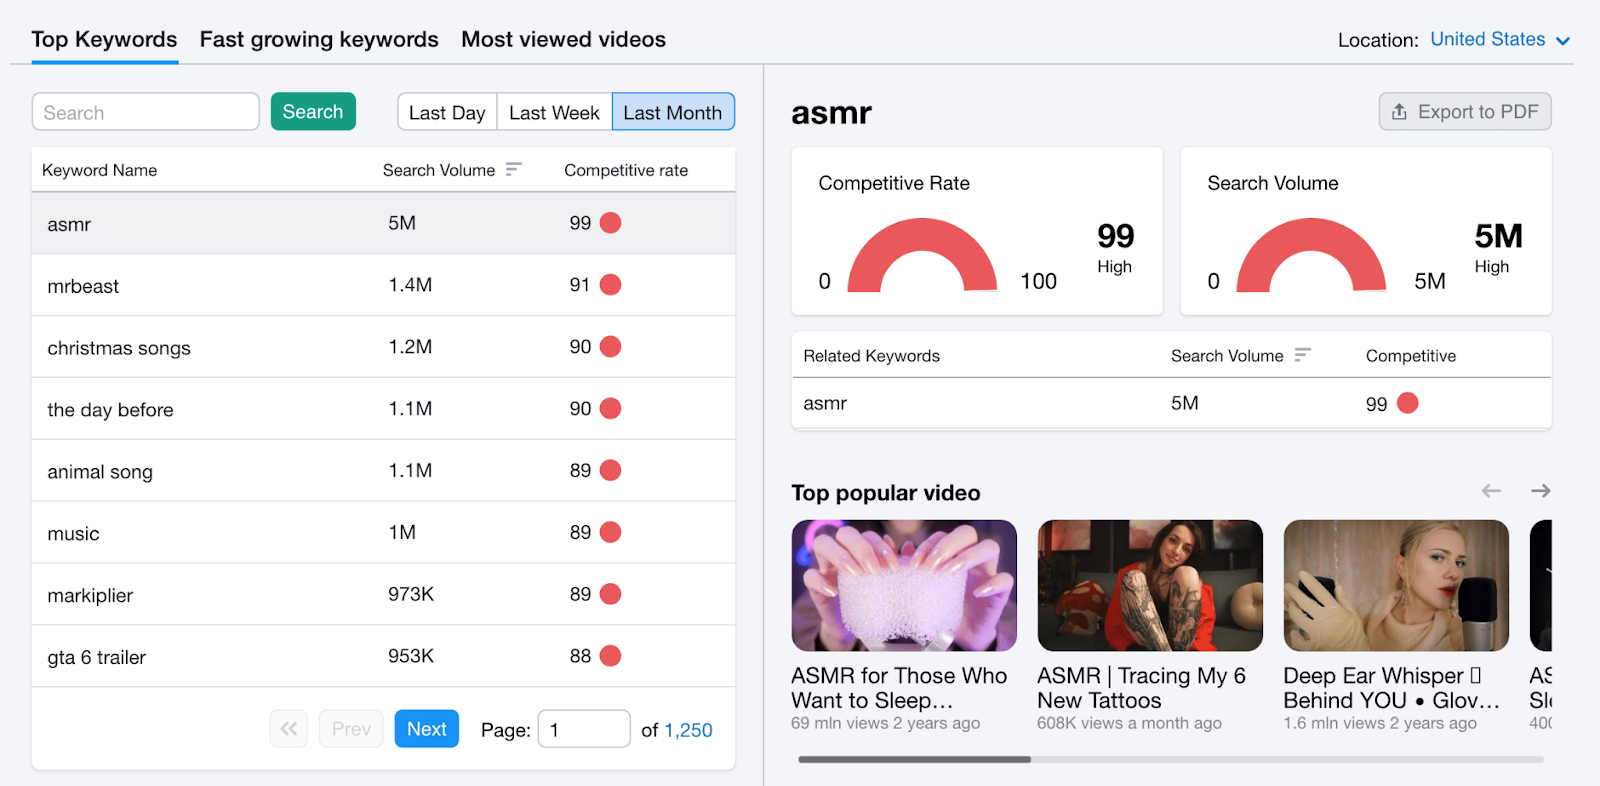 "Top Keywords" dashboard overview in Keyword Analytics for YouTube